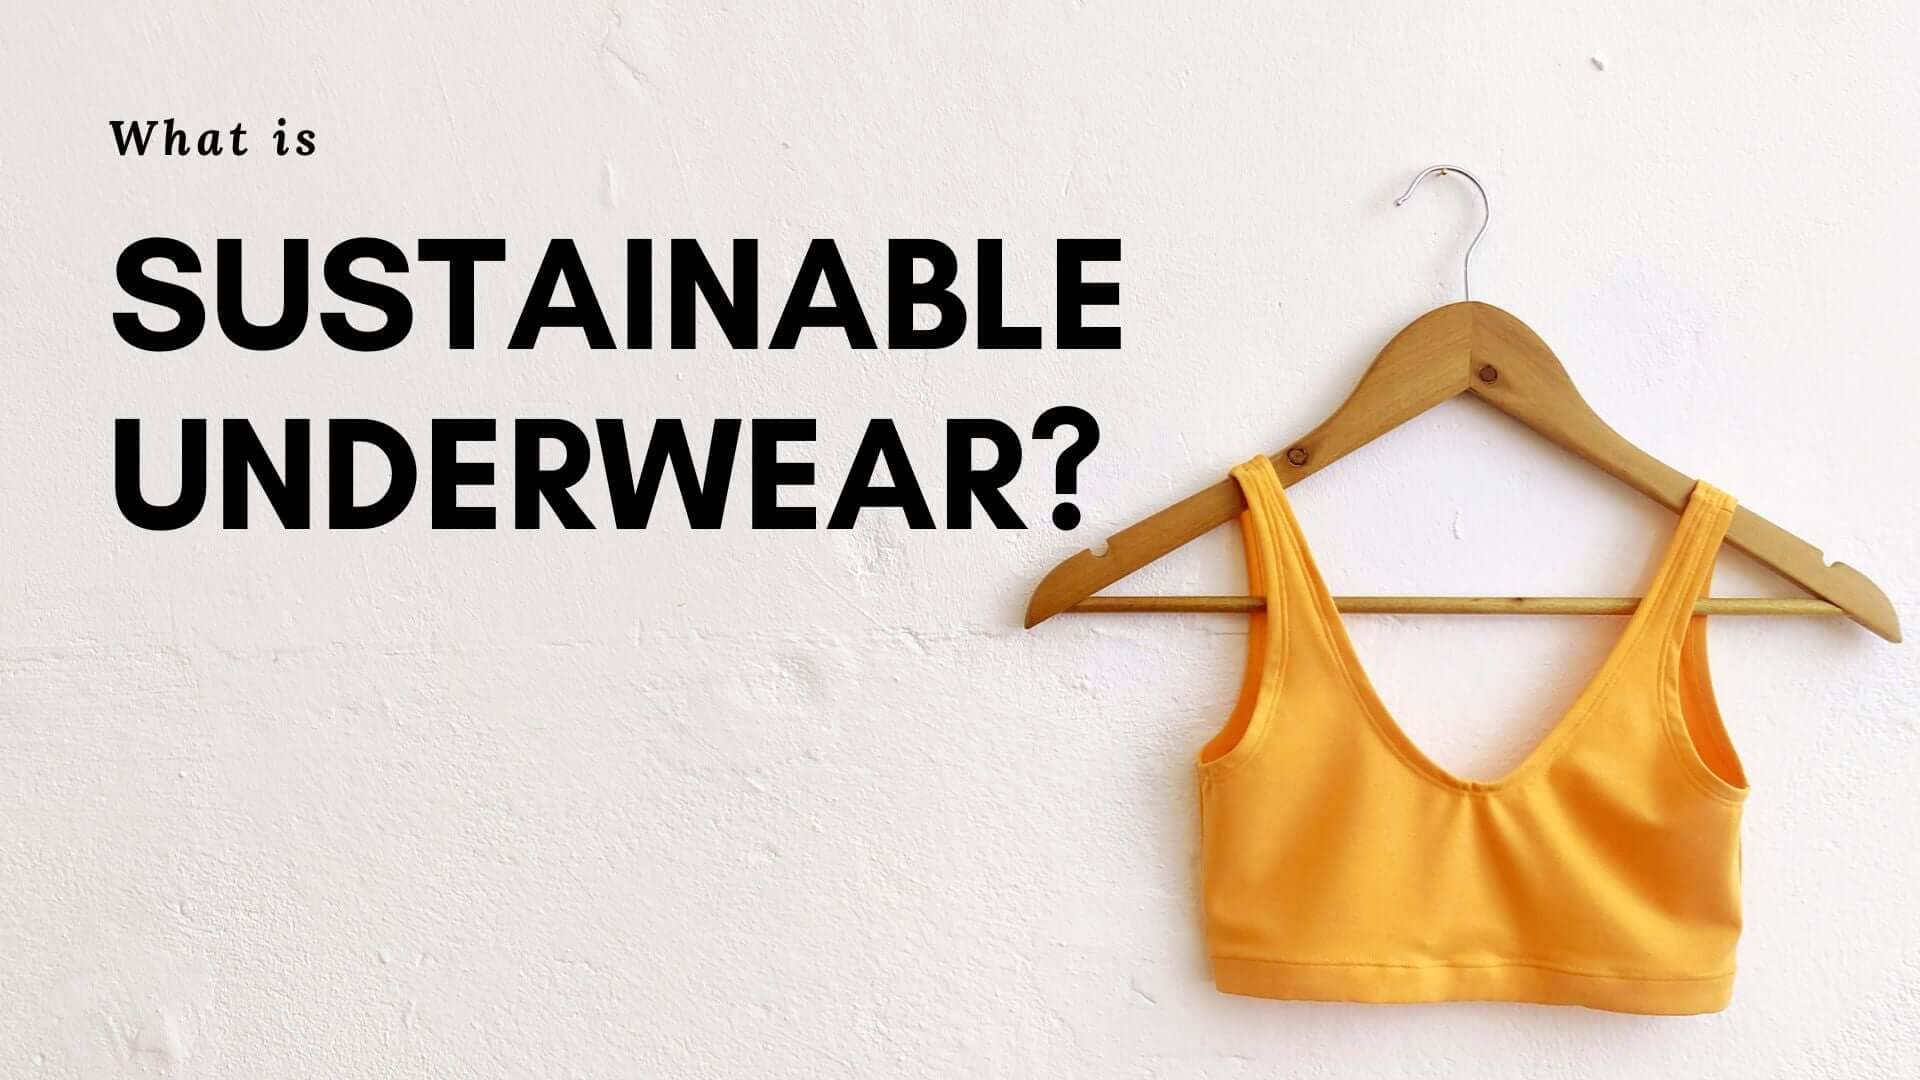 ZeroWaste-Global - Disposable Underwear Women & Men plastic free,  biodegradable & compostable. Made of plant fibers. Compared to fibers such  as cotton, modal is considered more sustainable, as less water and energy